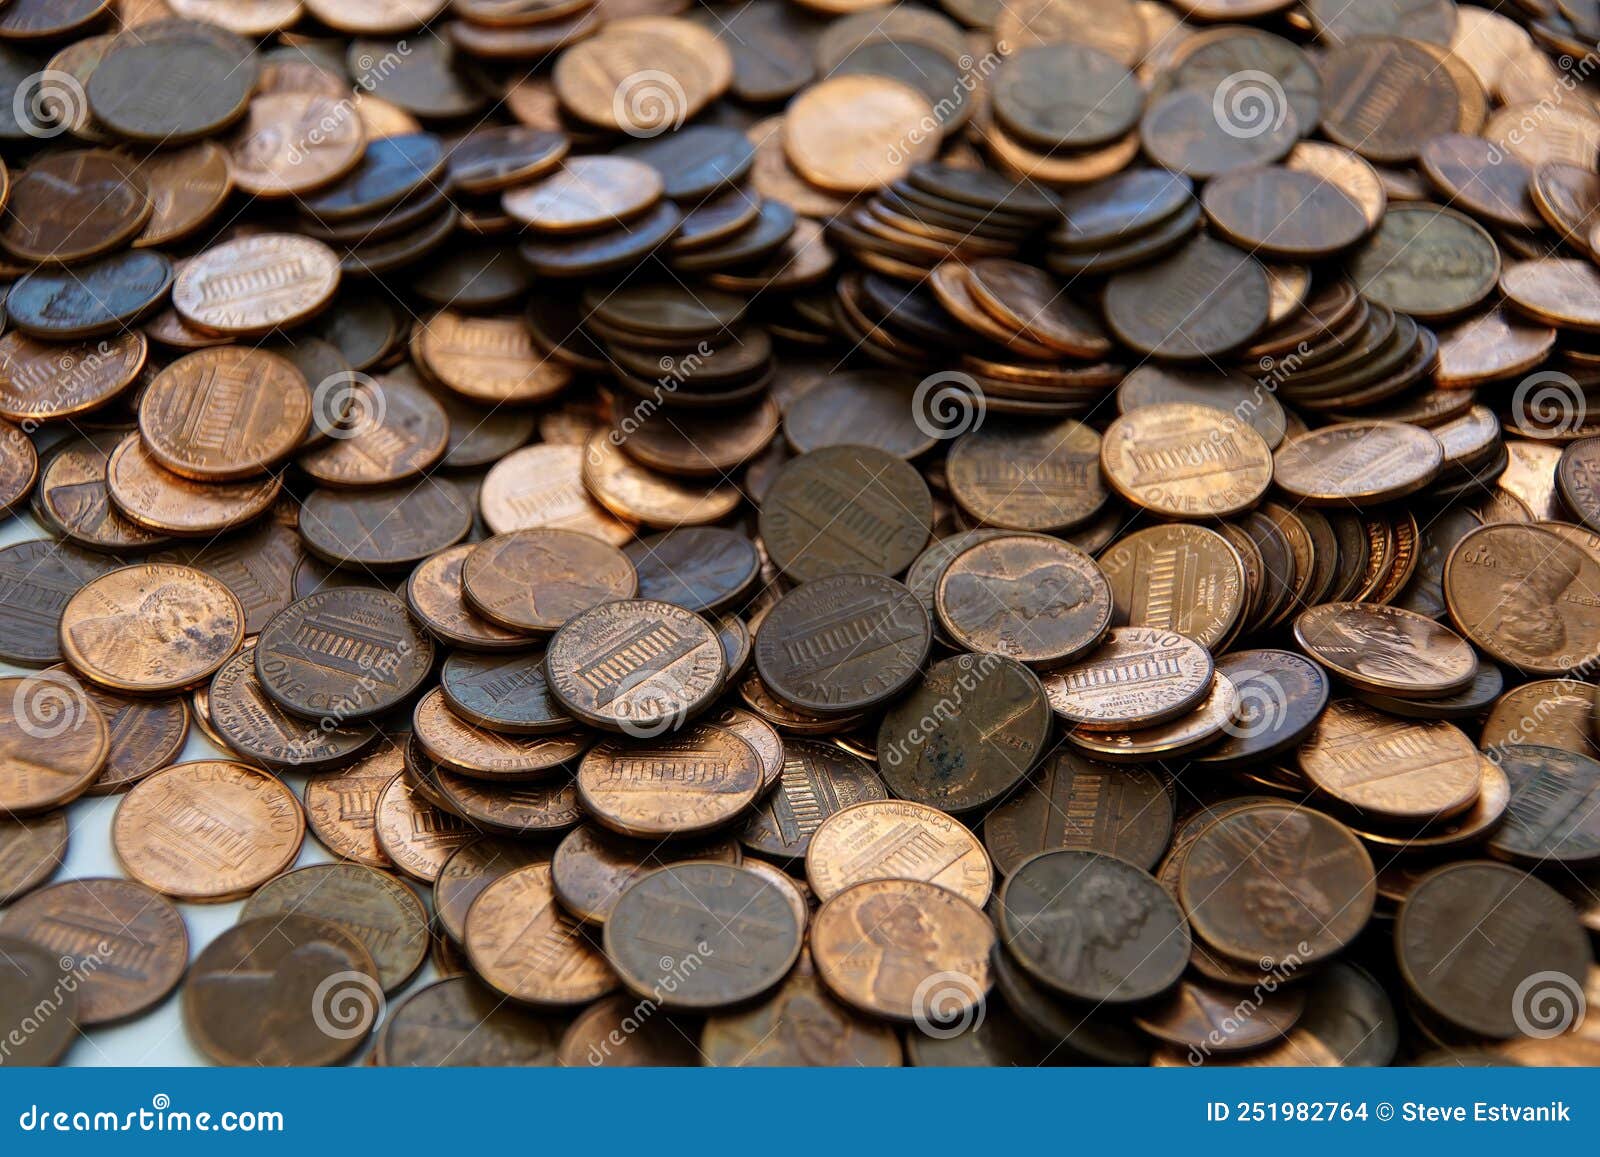 hoard of united states penny coin